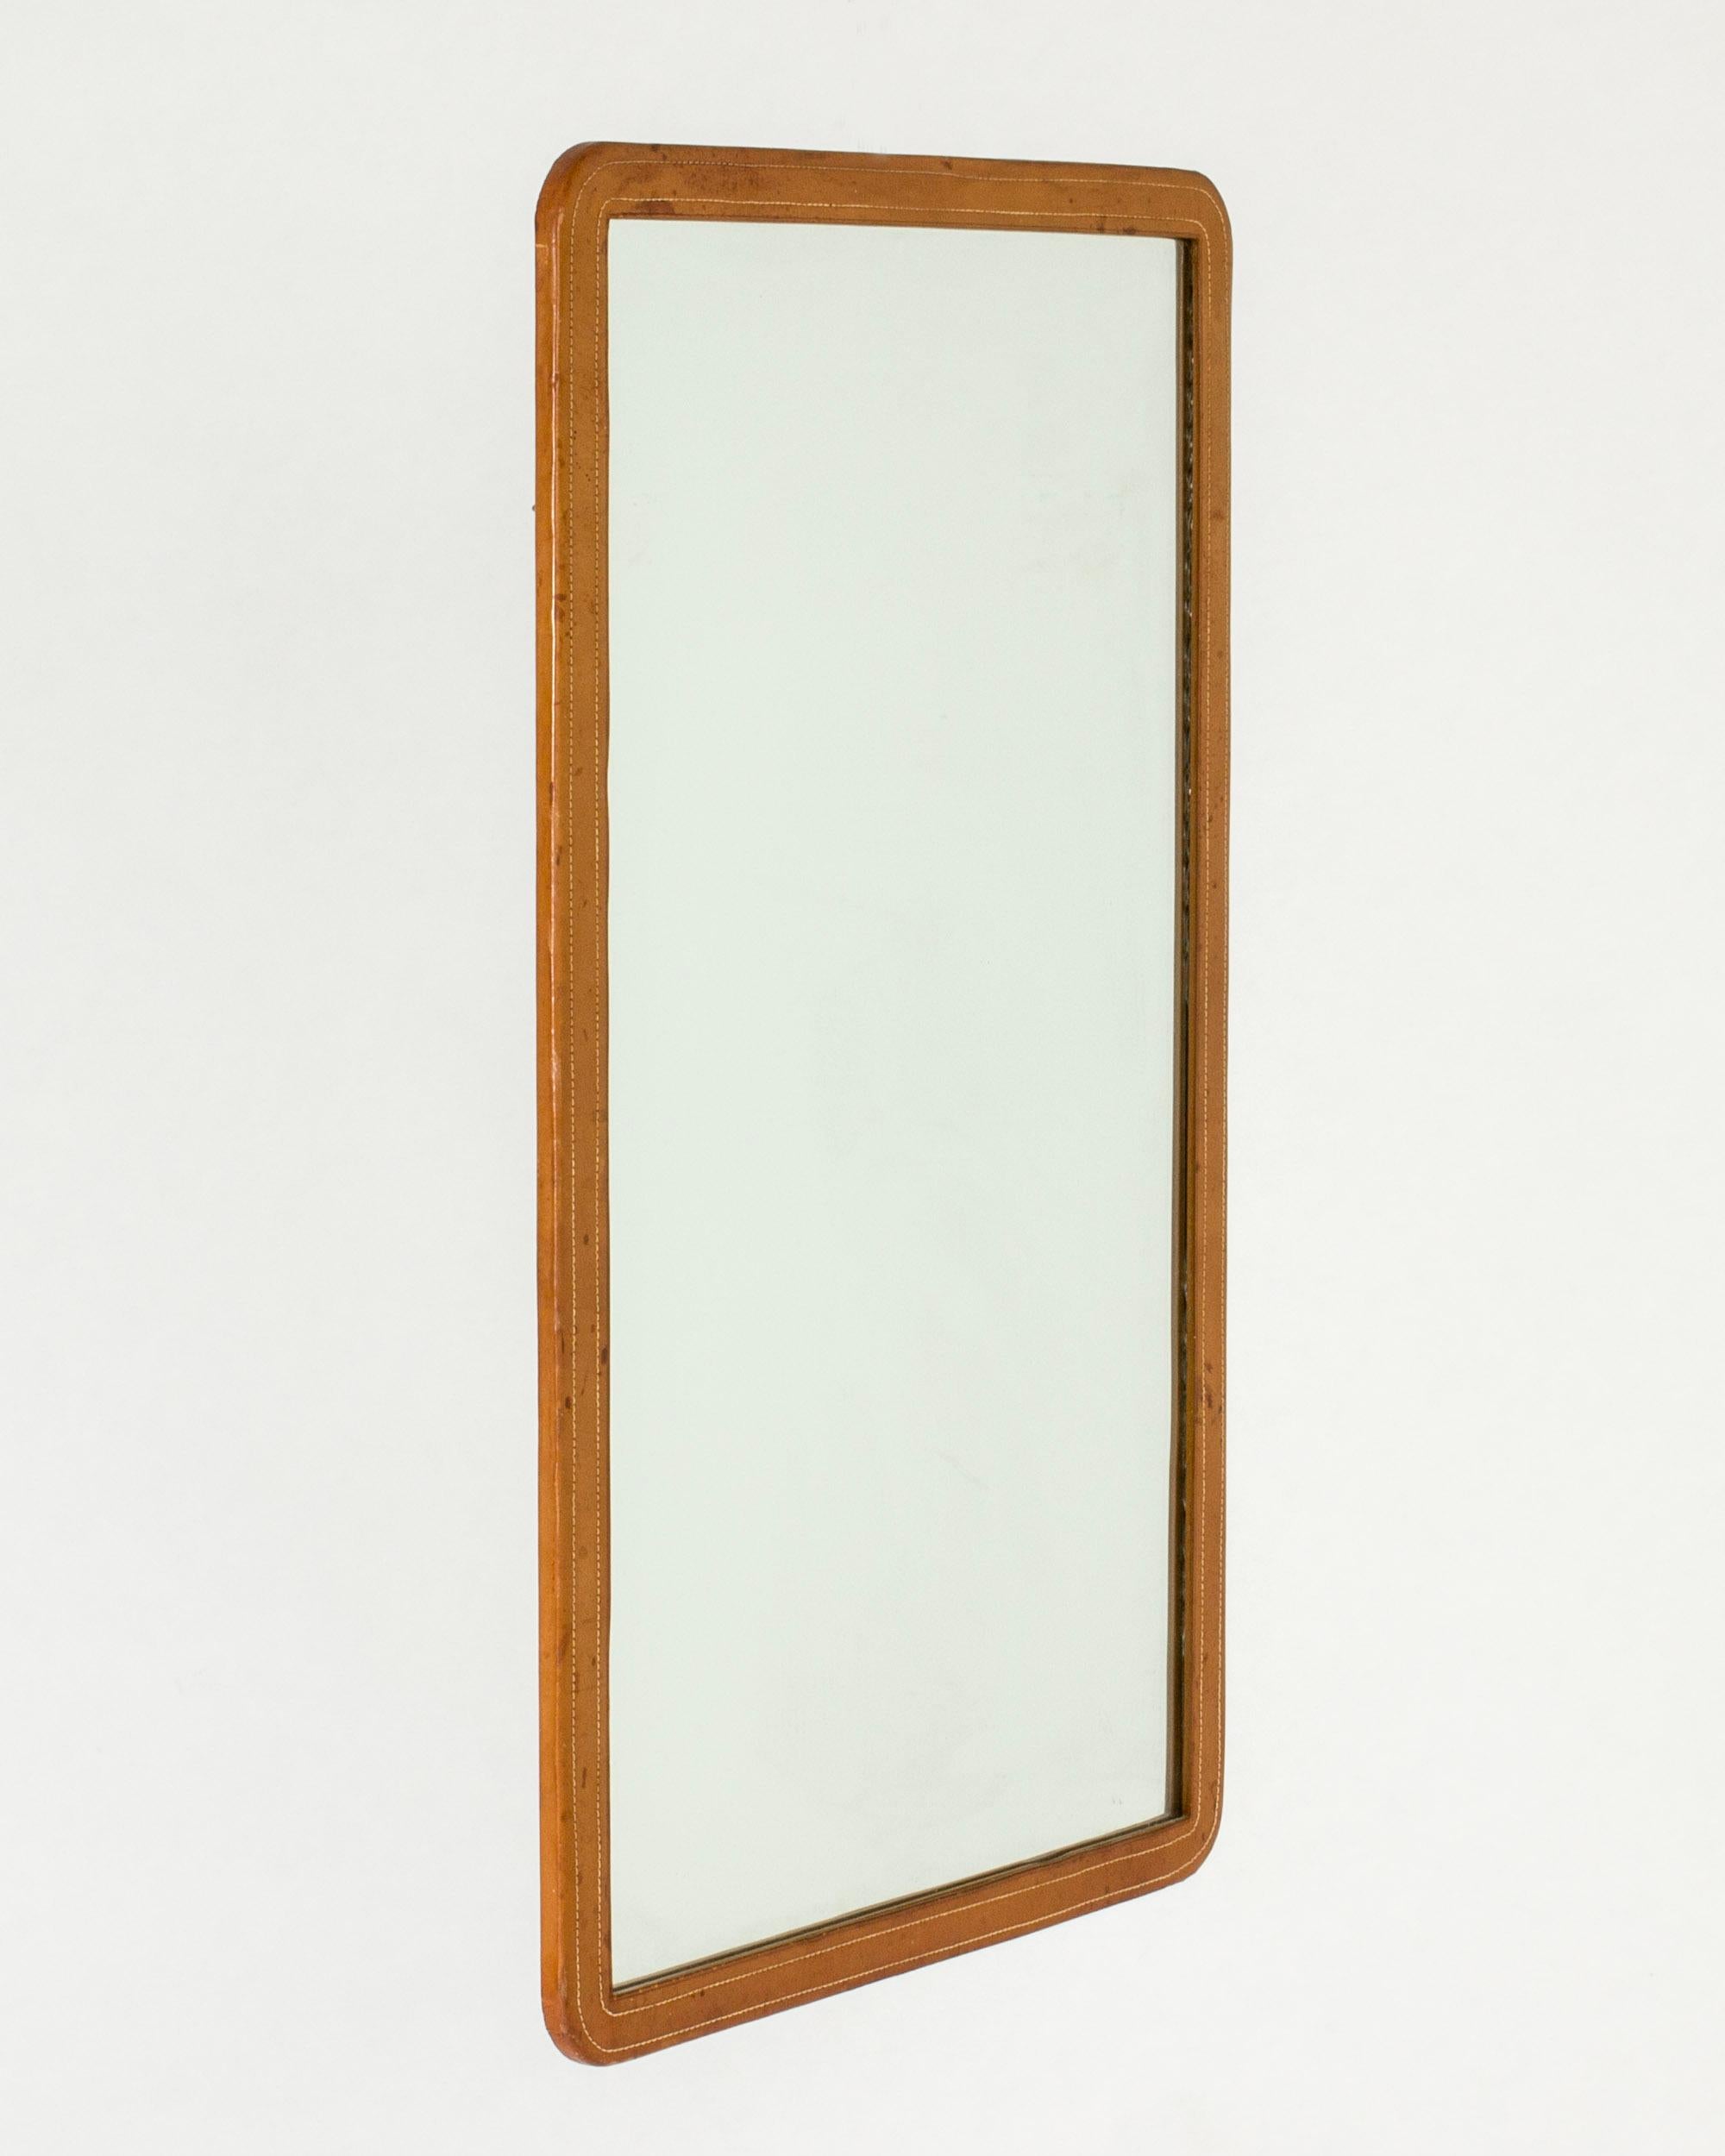 Swedish Midcentury wall mirror with leather frame, NK, Sweden, 1946